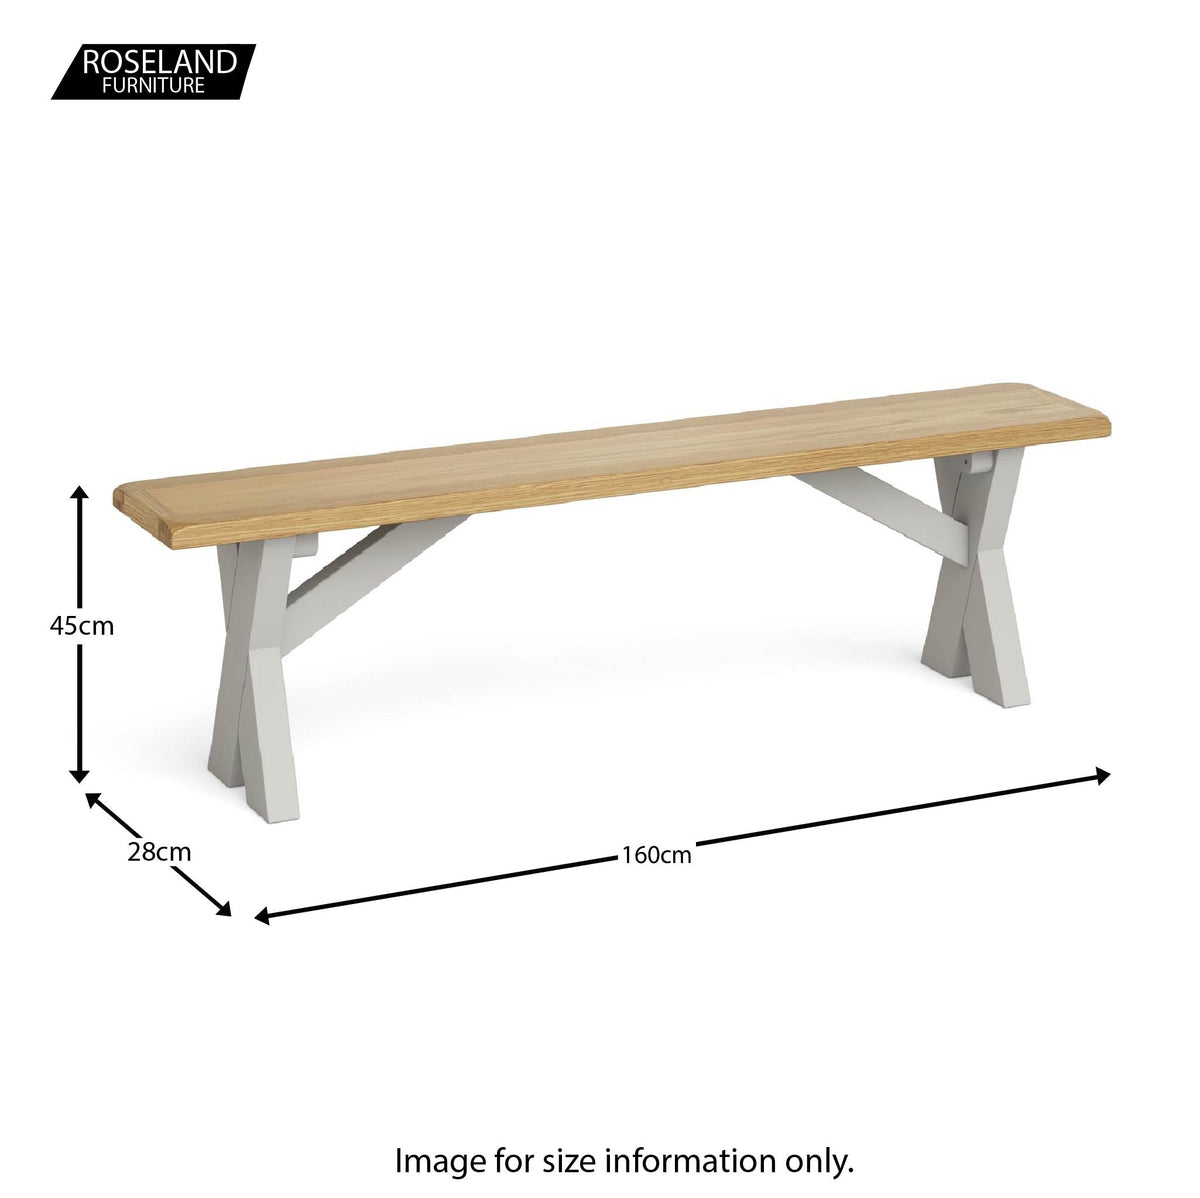 Lundy Grey Crossed Based Oak Topped Bench - Size guide